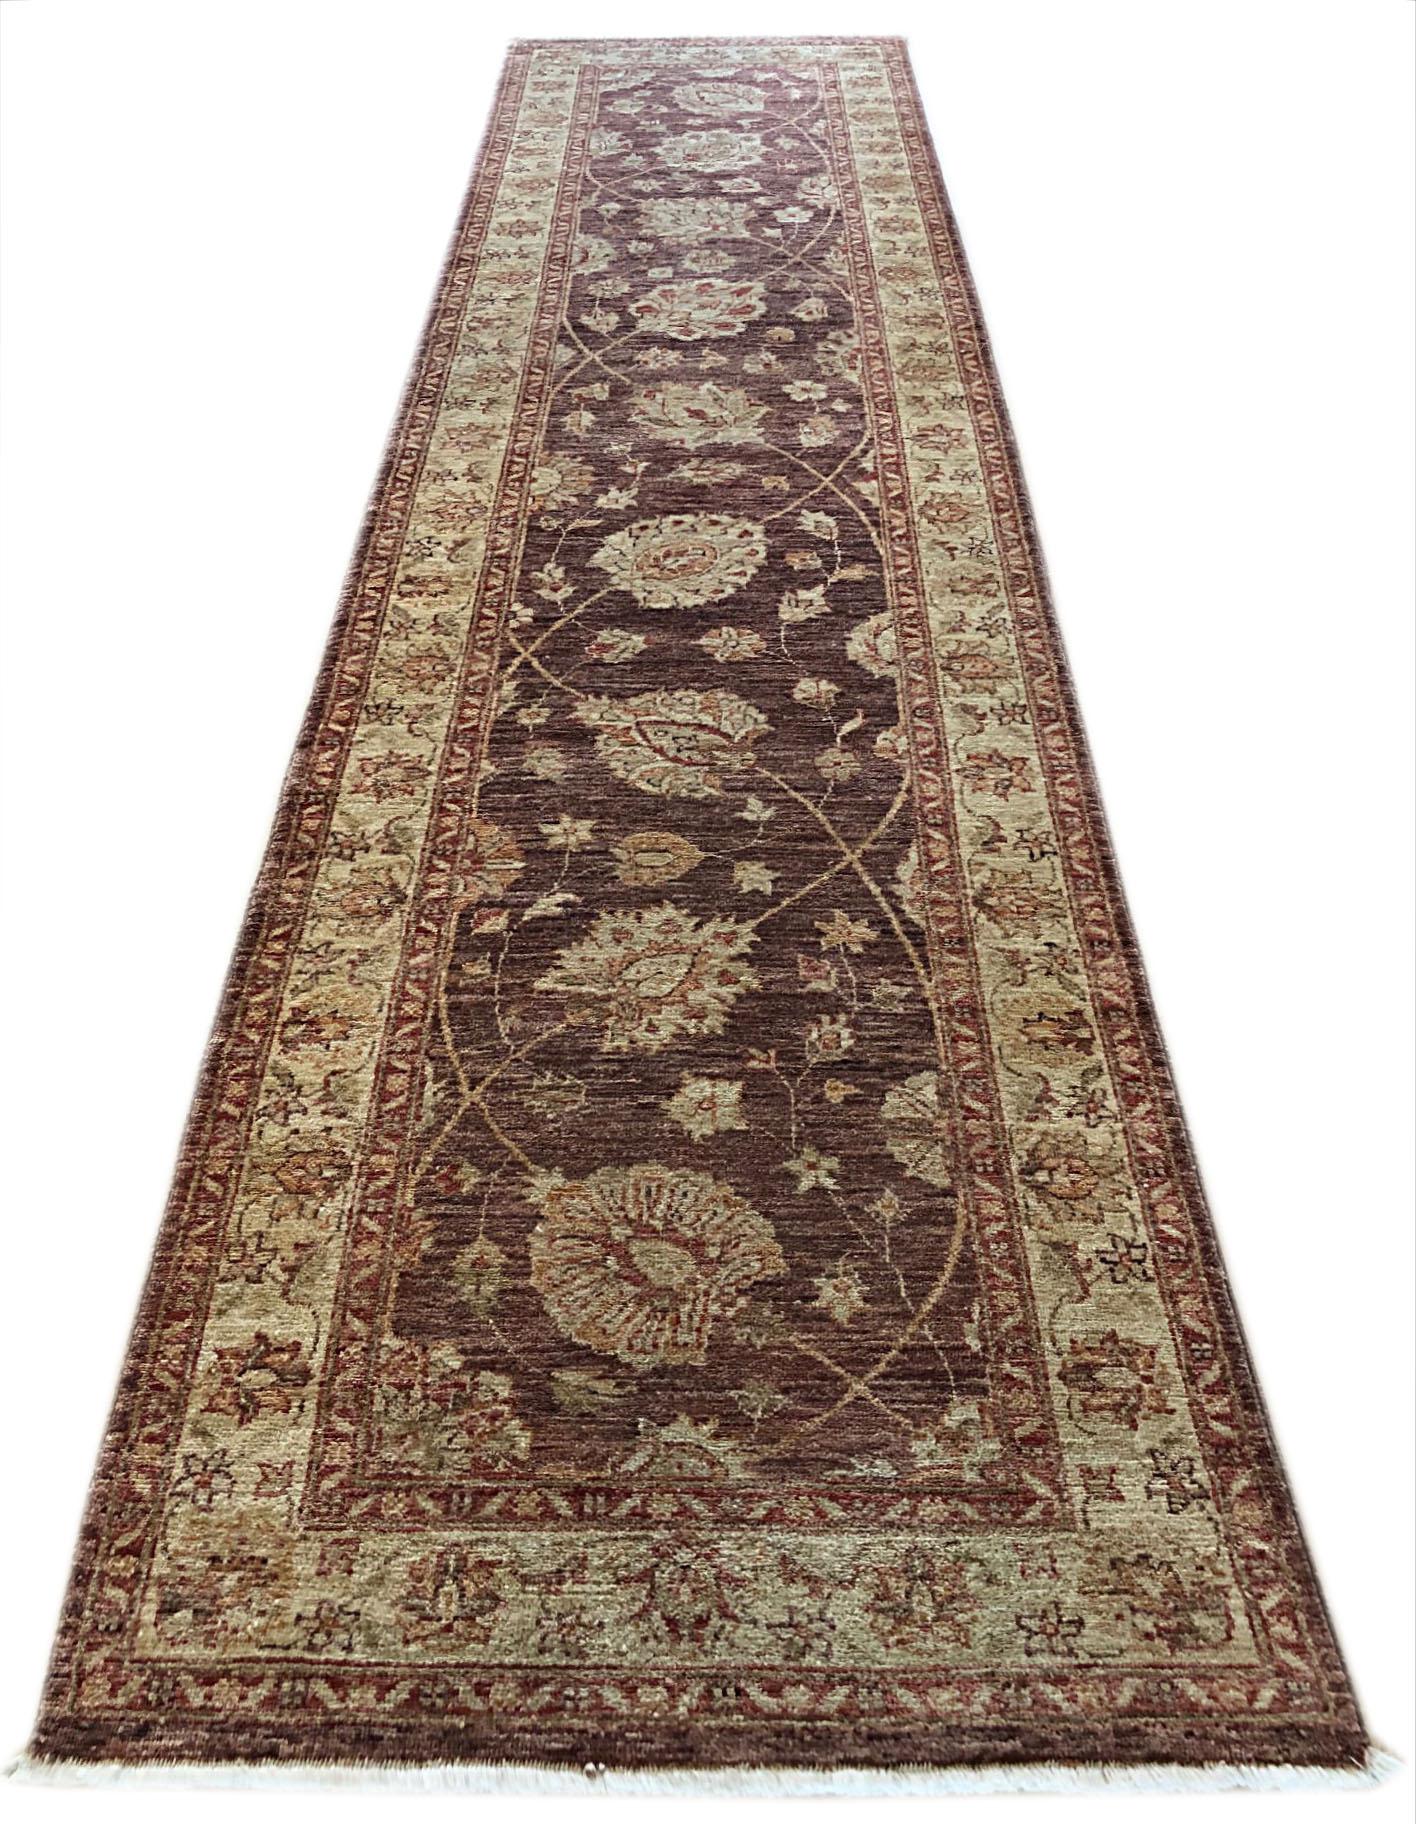 This Peshawar Pakistan rug is a finely knotted with a wool pile and cotton weft. The base color is brown and the border is light brown. The Peshawar rugs are in high demand across the market because their design, quality and color combination. This